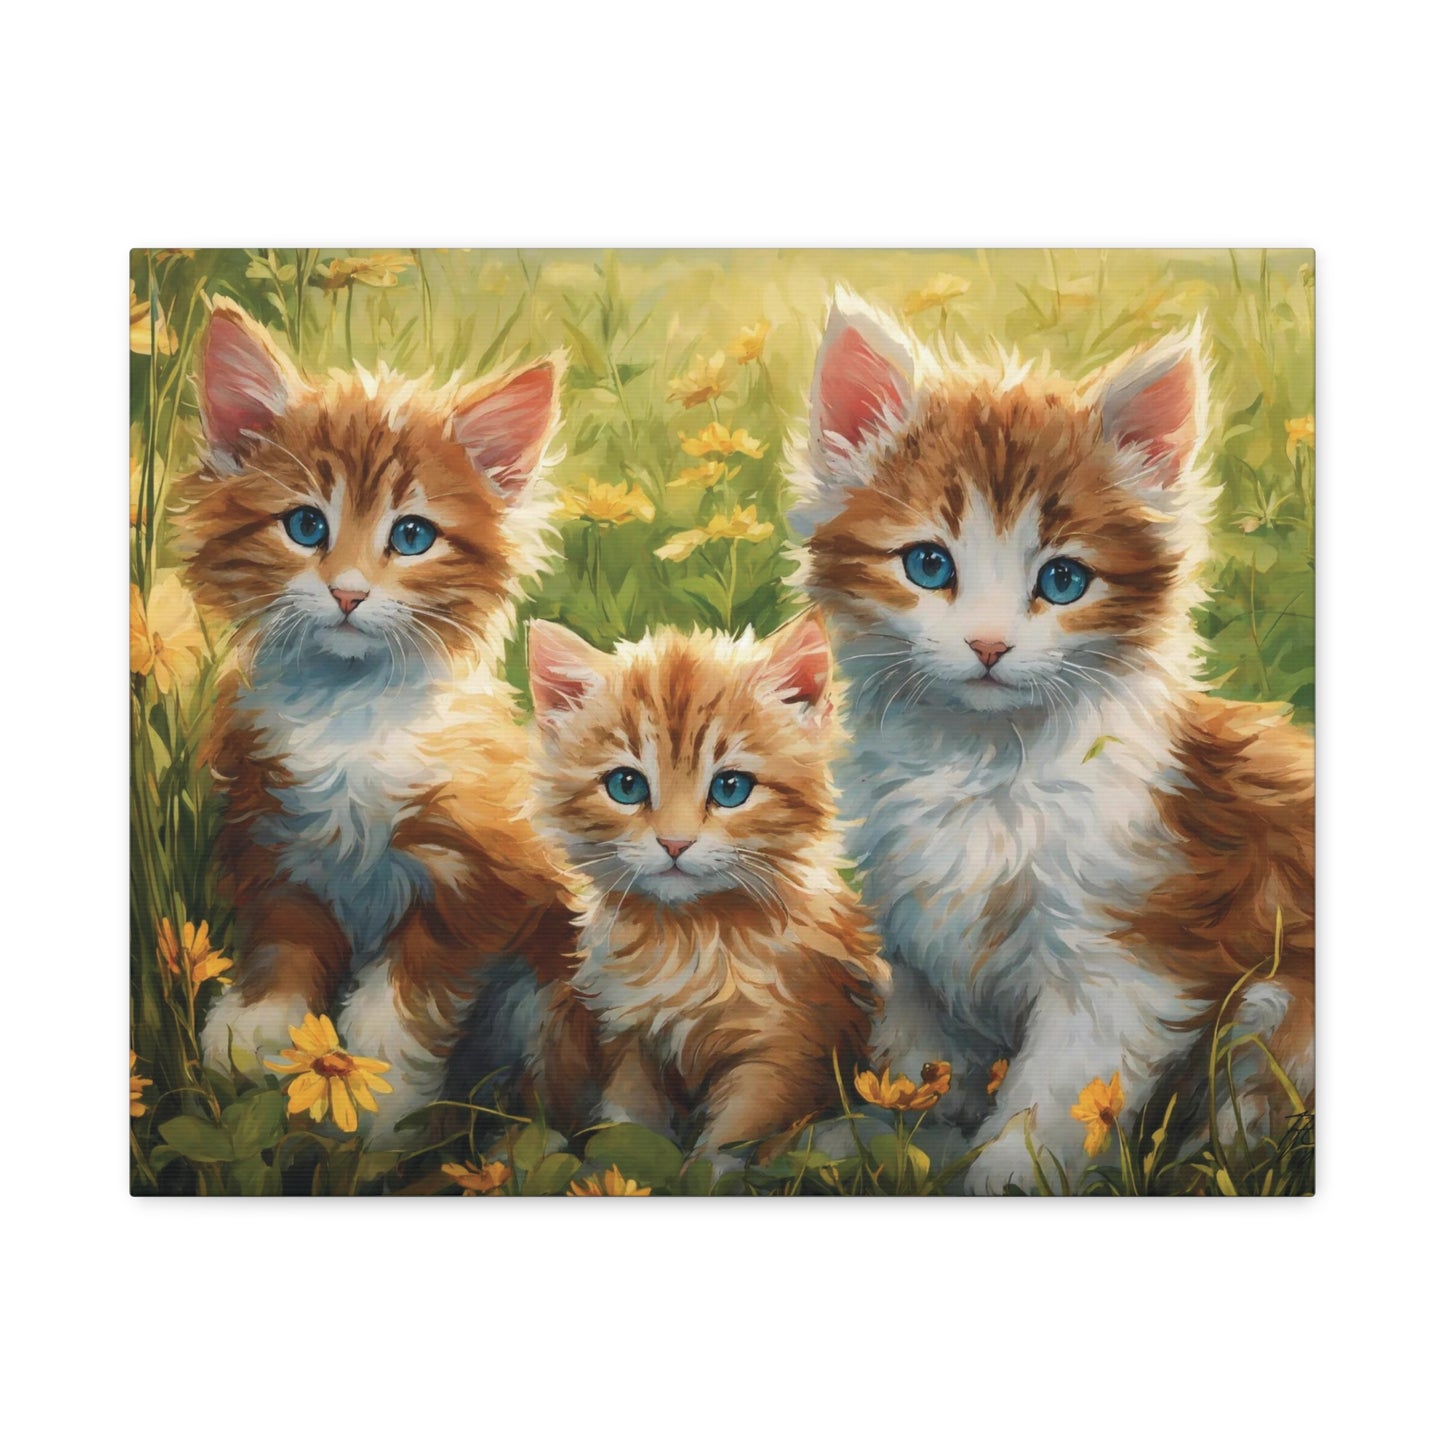 “Three Little Kittens in a Field of Daisies”